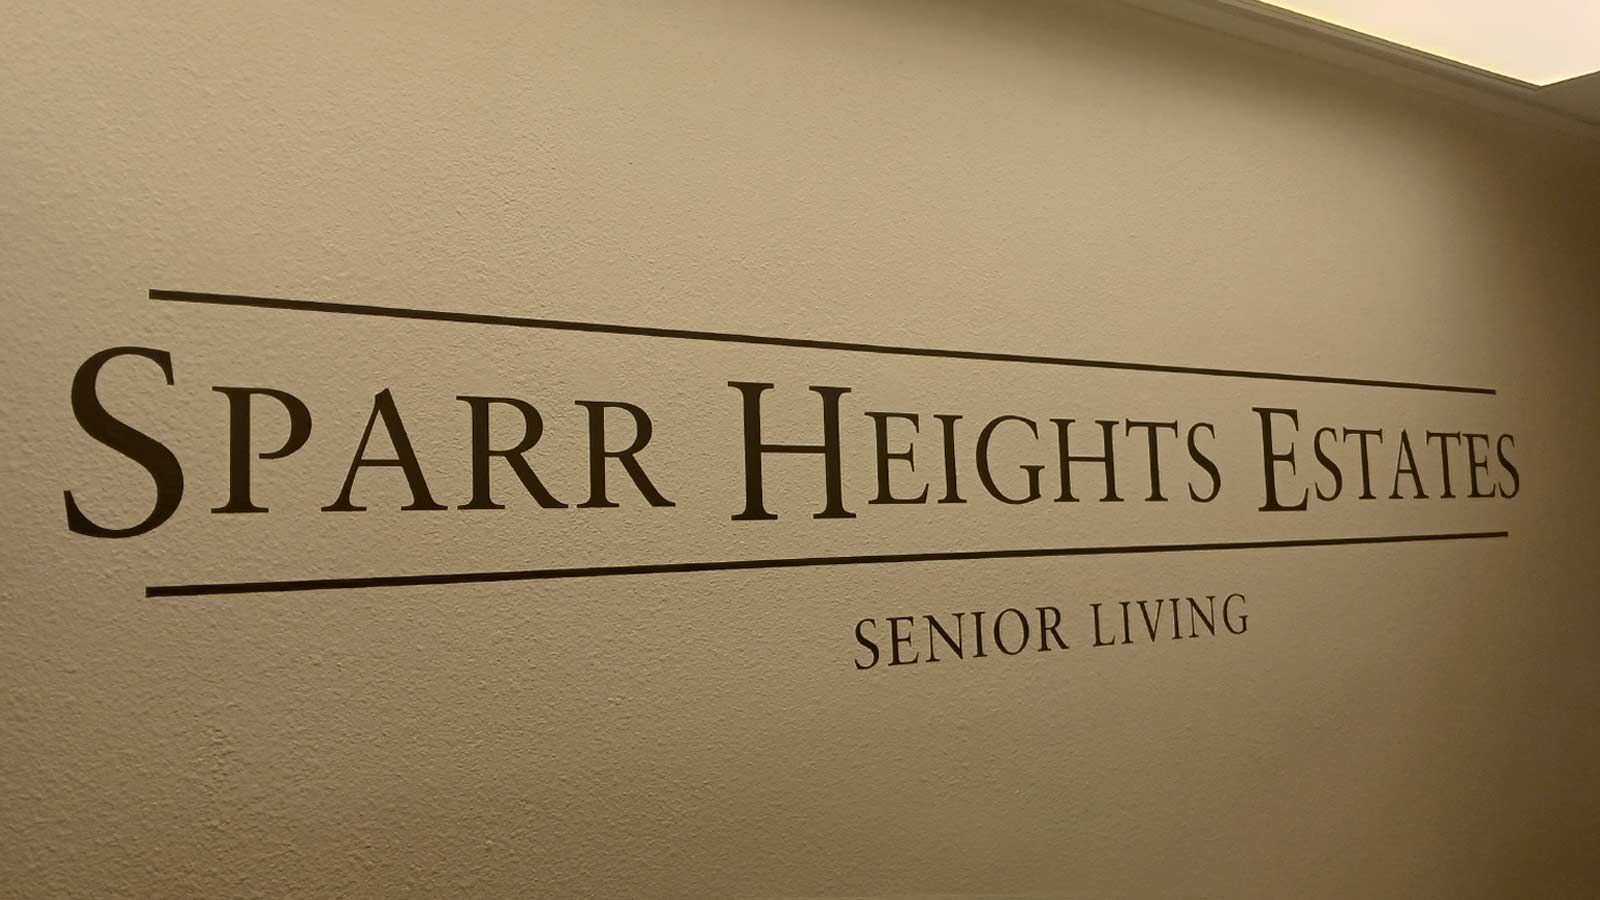 Sparr Heights Estates wall decal attached indoors